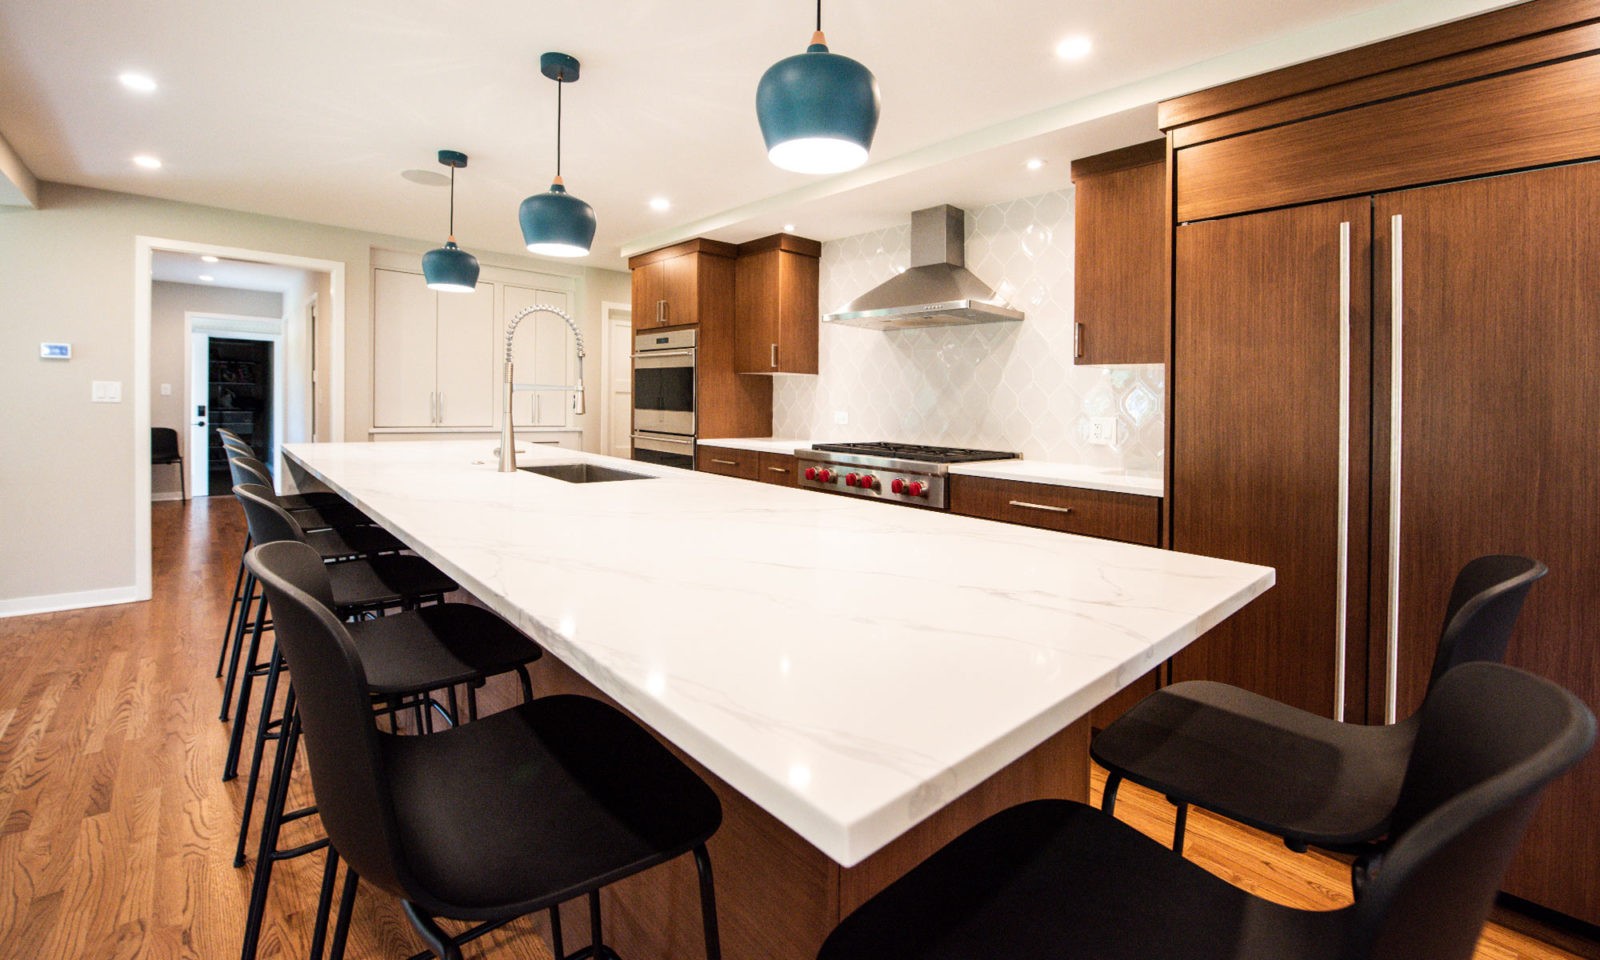 modern hinsdale kitchen remodel with white counters and blue pendant lights